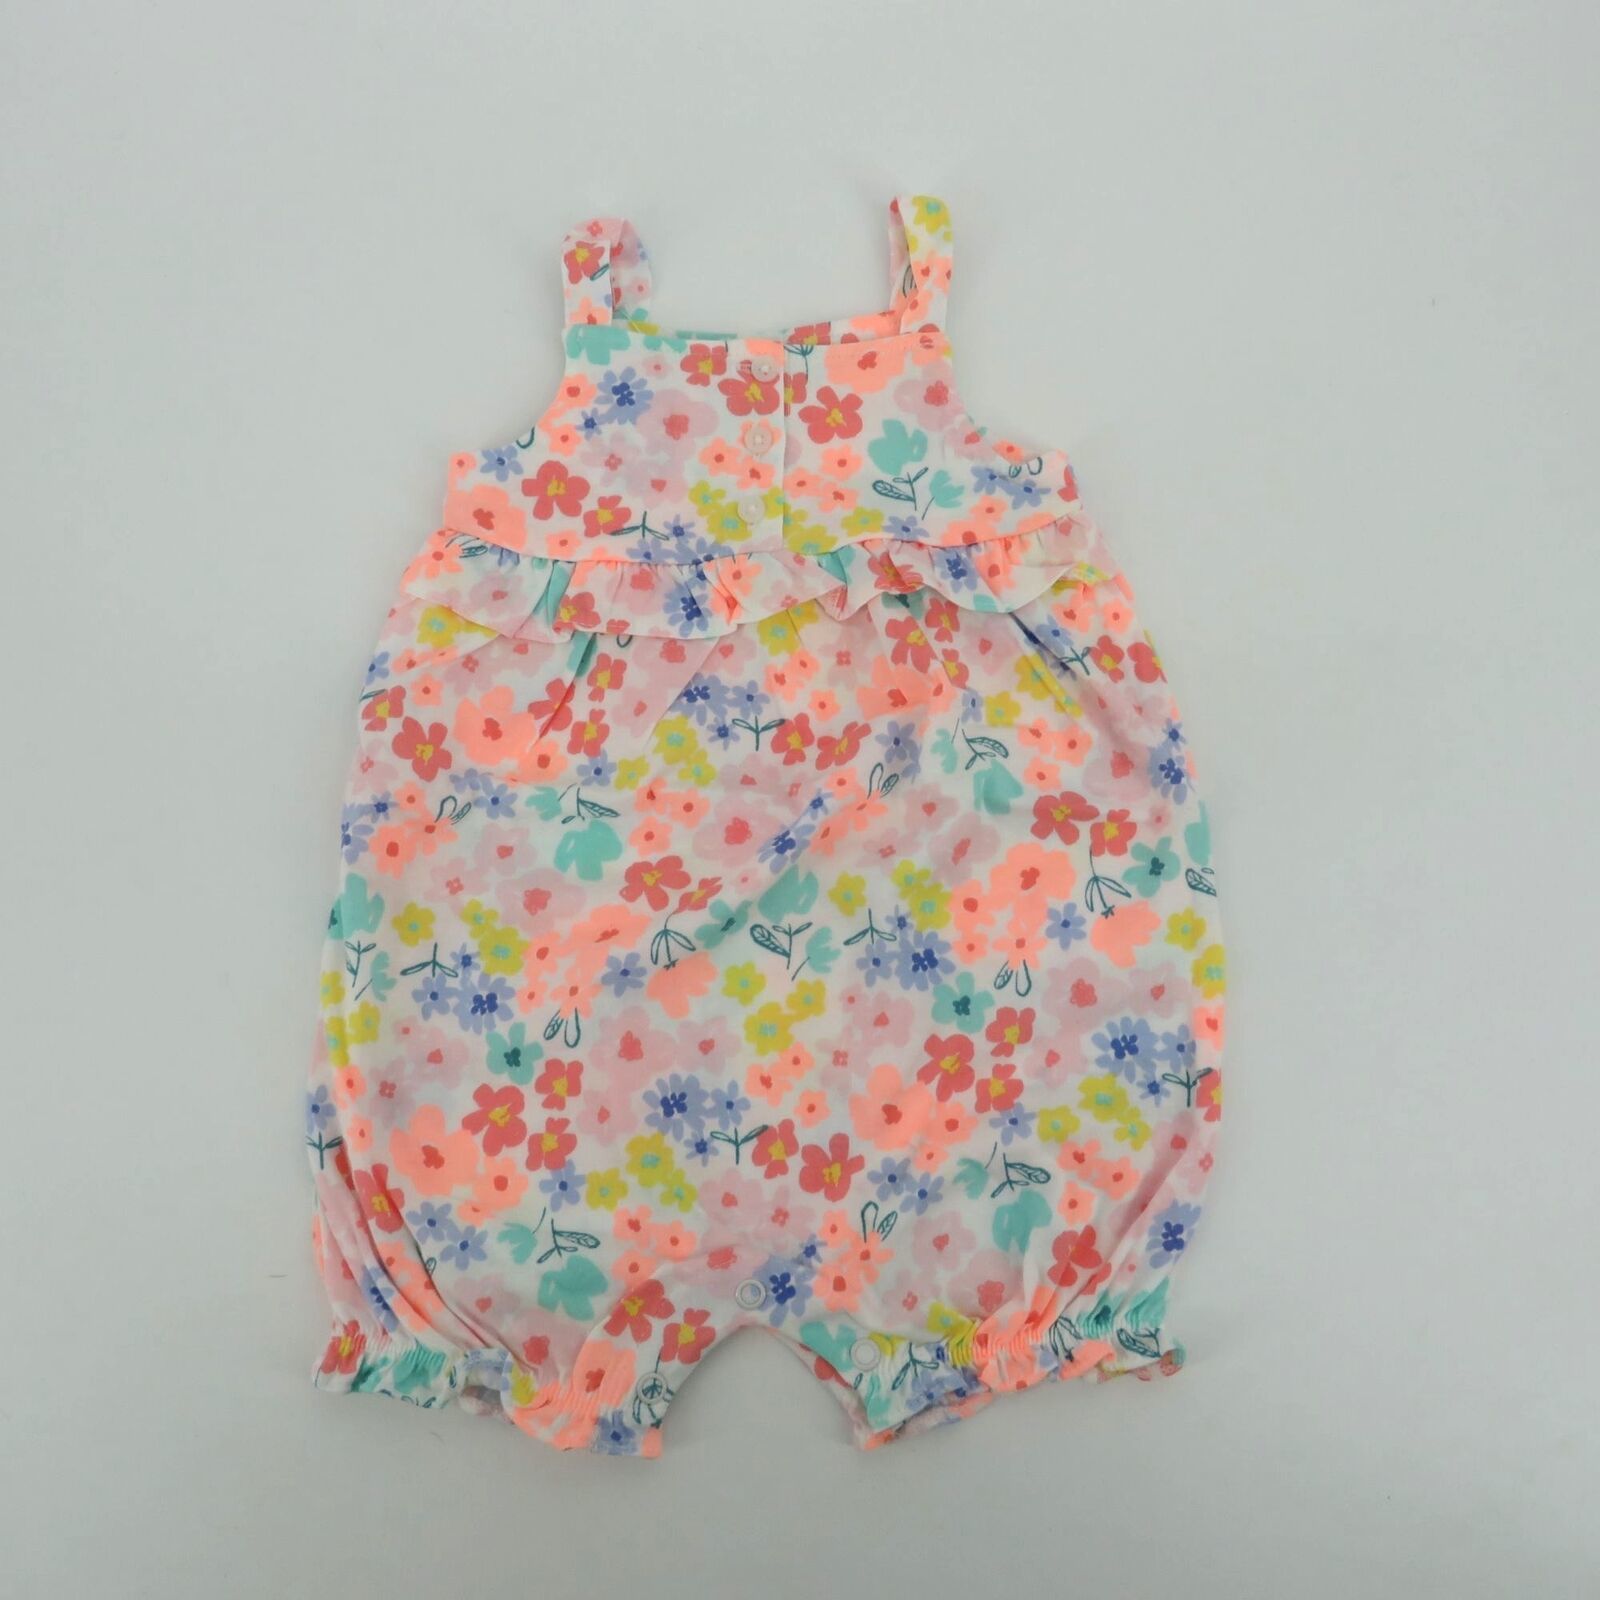 Primary image for Carter's Baby Girls Floral Ruffle Romper Multi Color Size 6 Months NWT $18